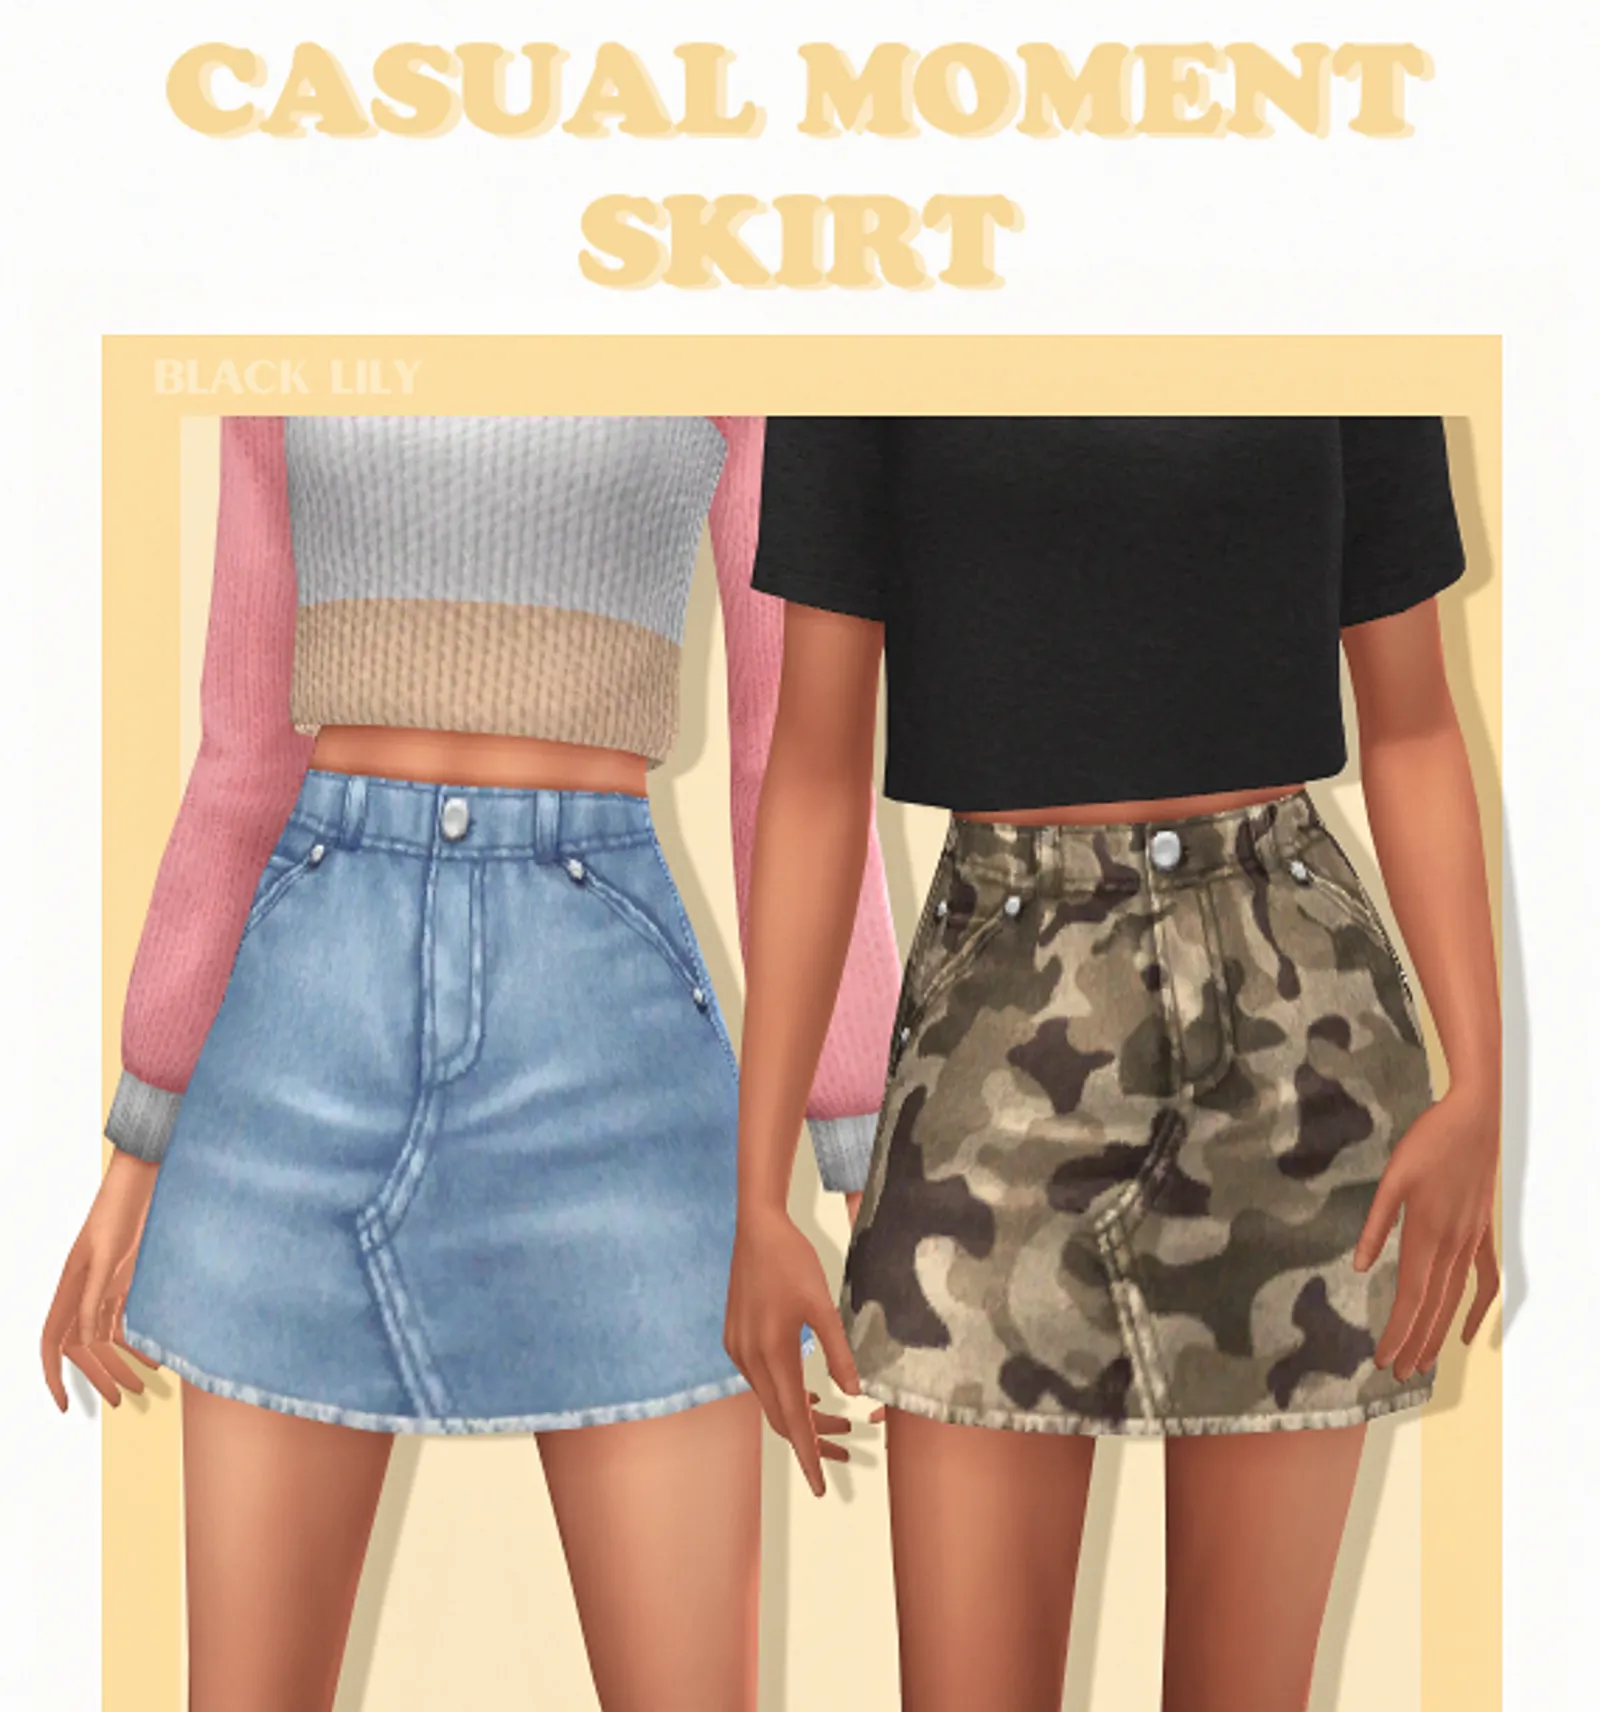 Casual Moment Skirt